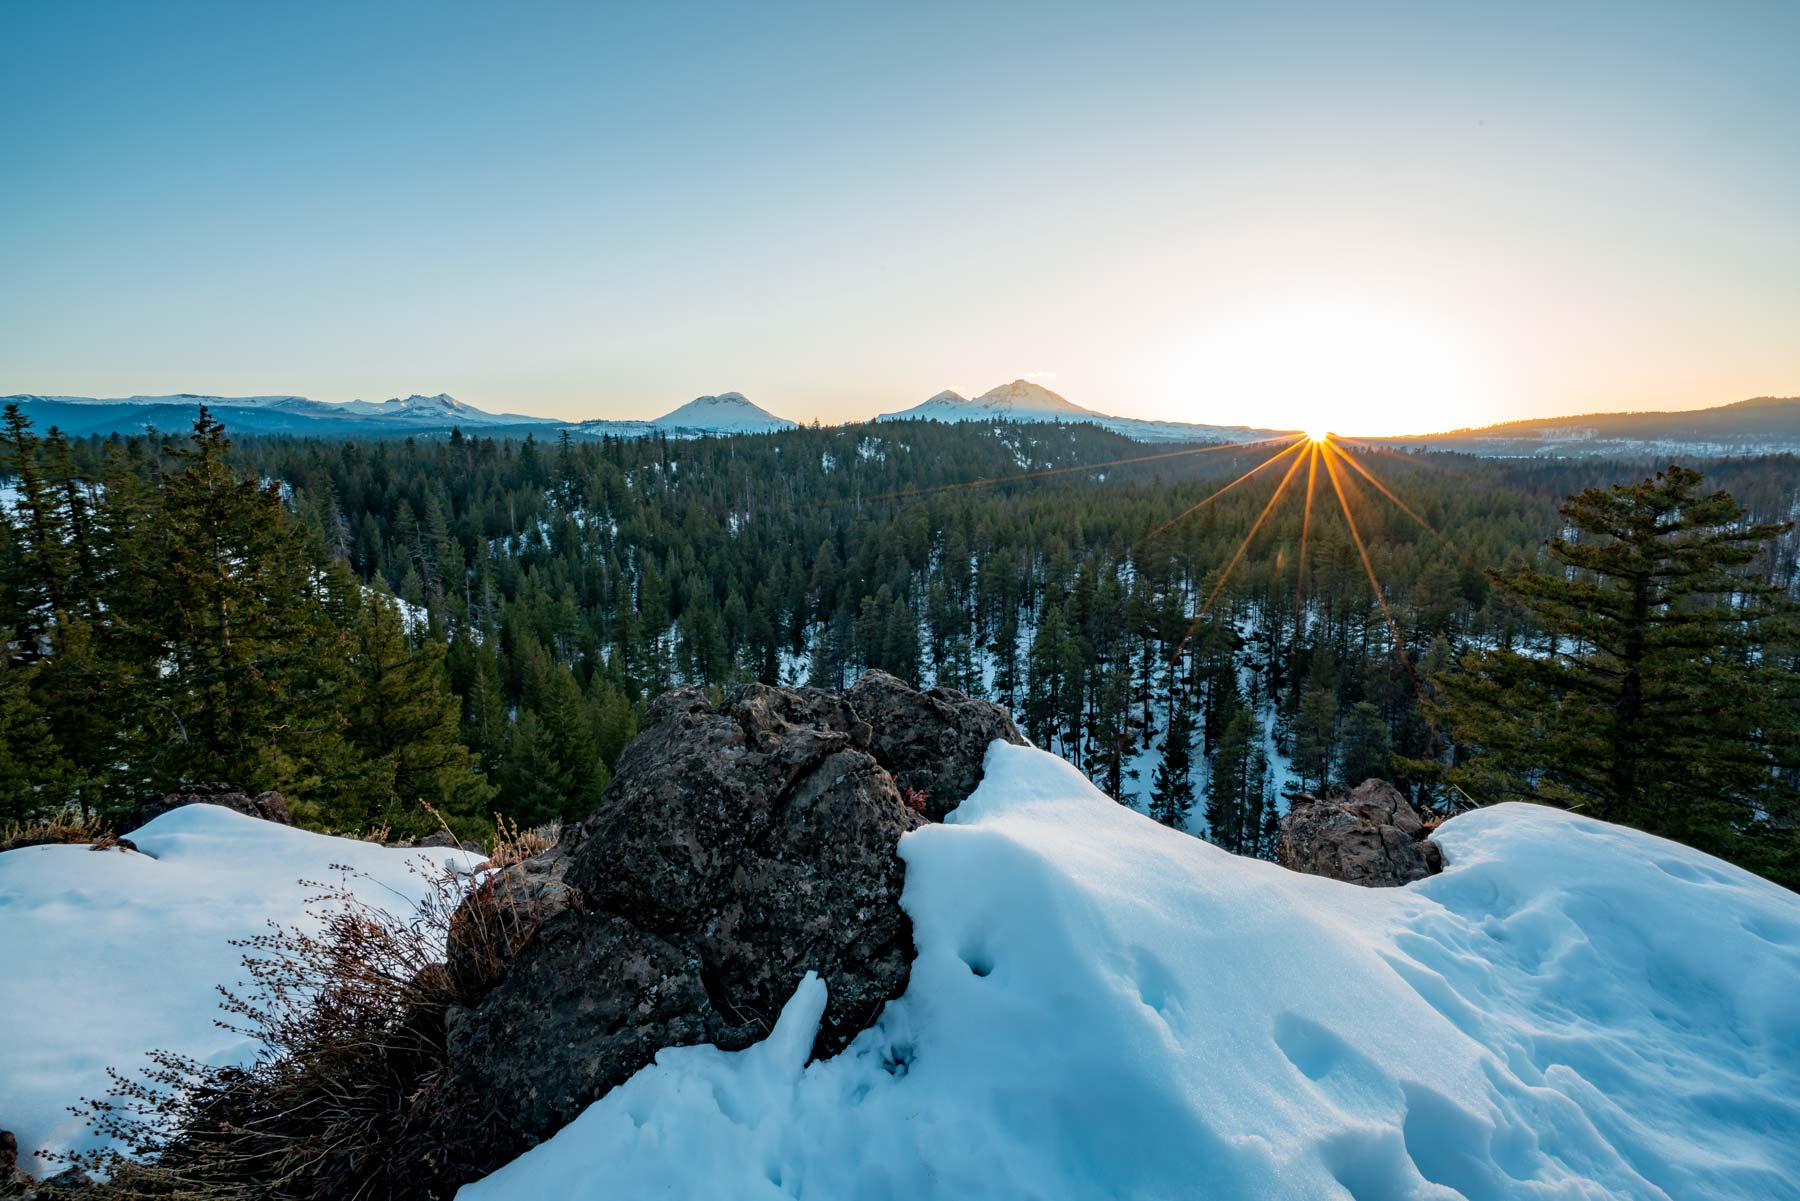 deschutes national forest in march